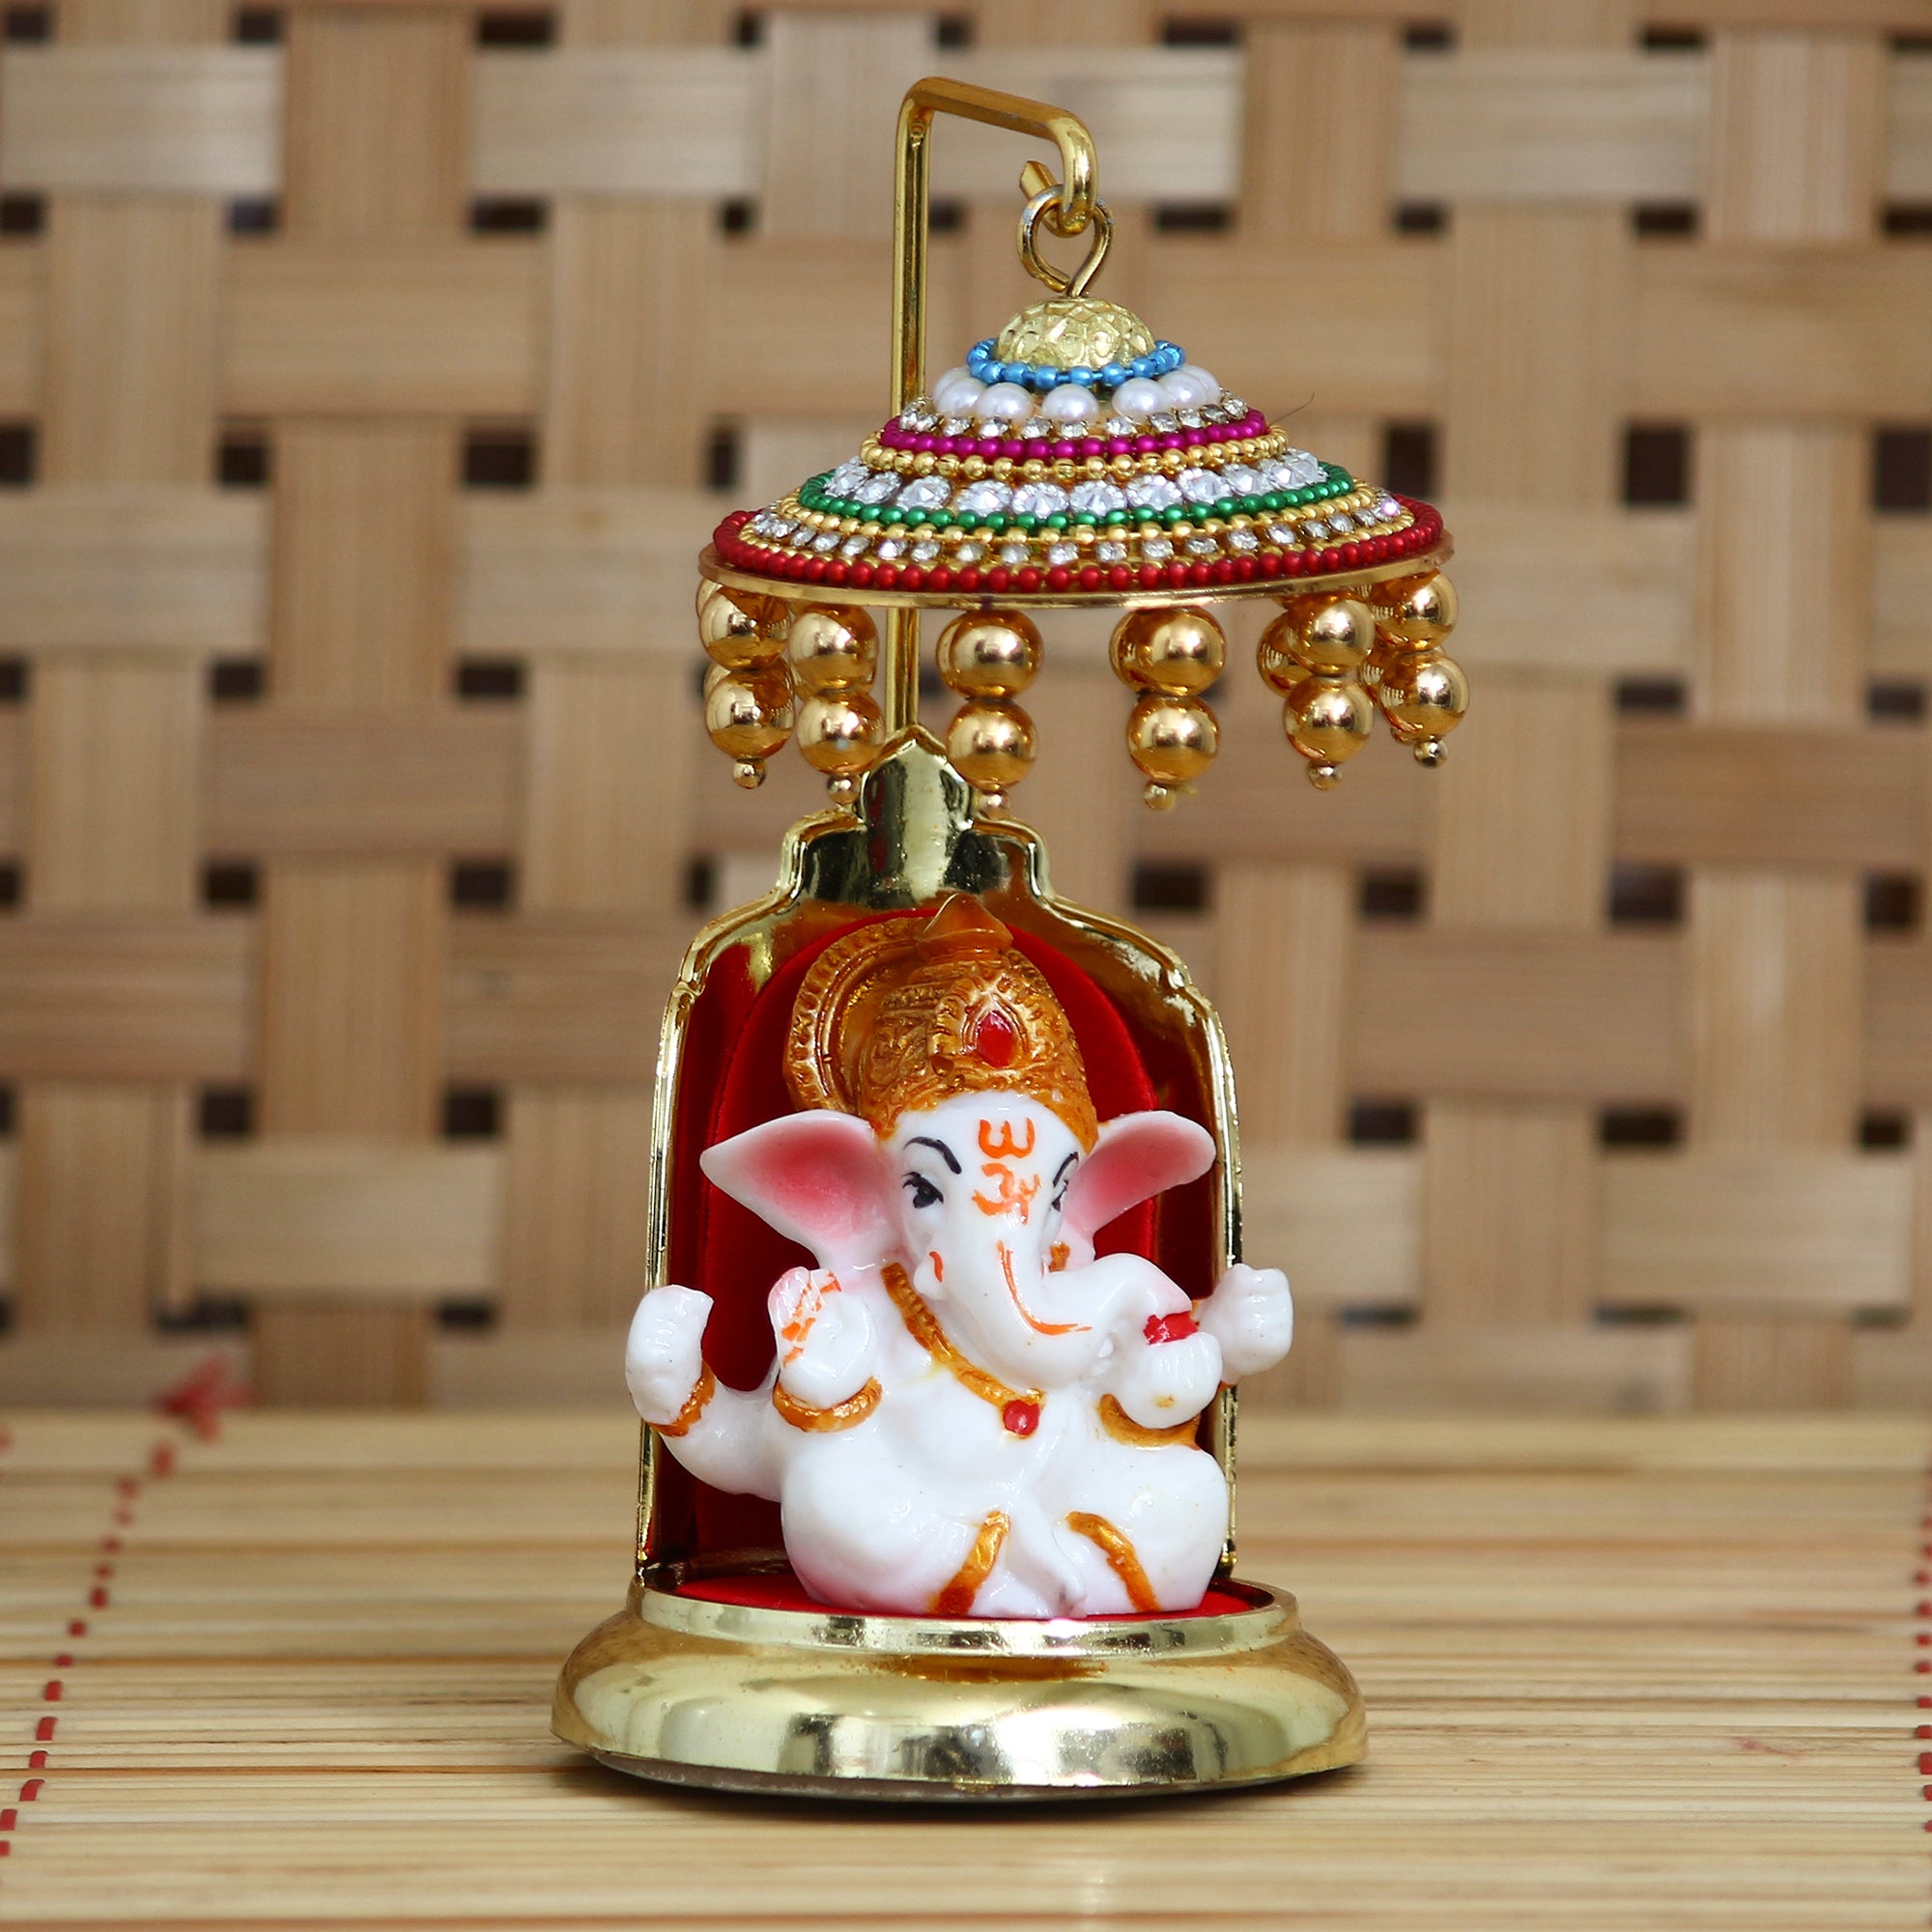 Decorative Lord Ganesha Idol with Designer Chatri for Car Dashboard, Home Temple and Office Desks 1